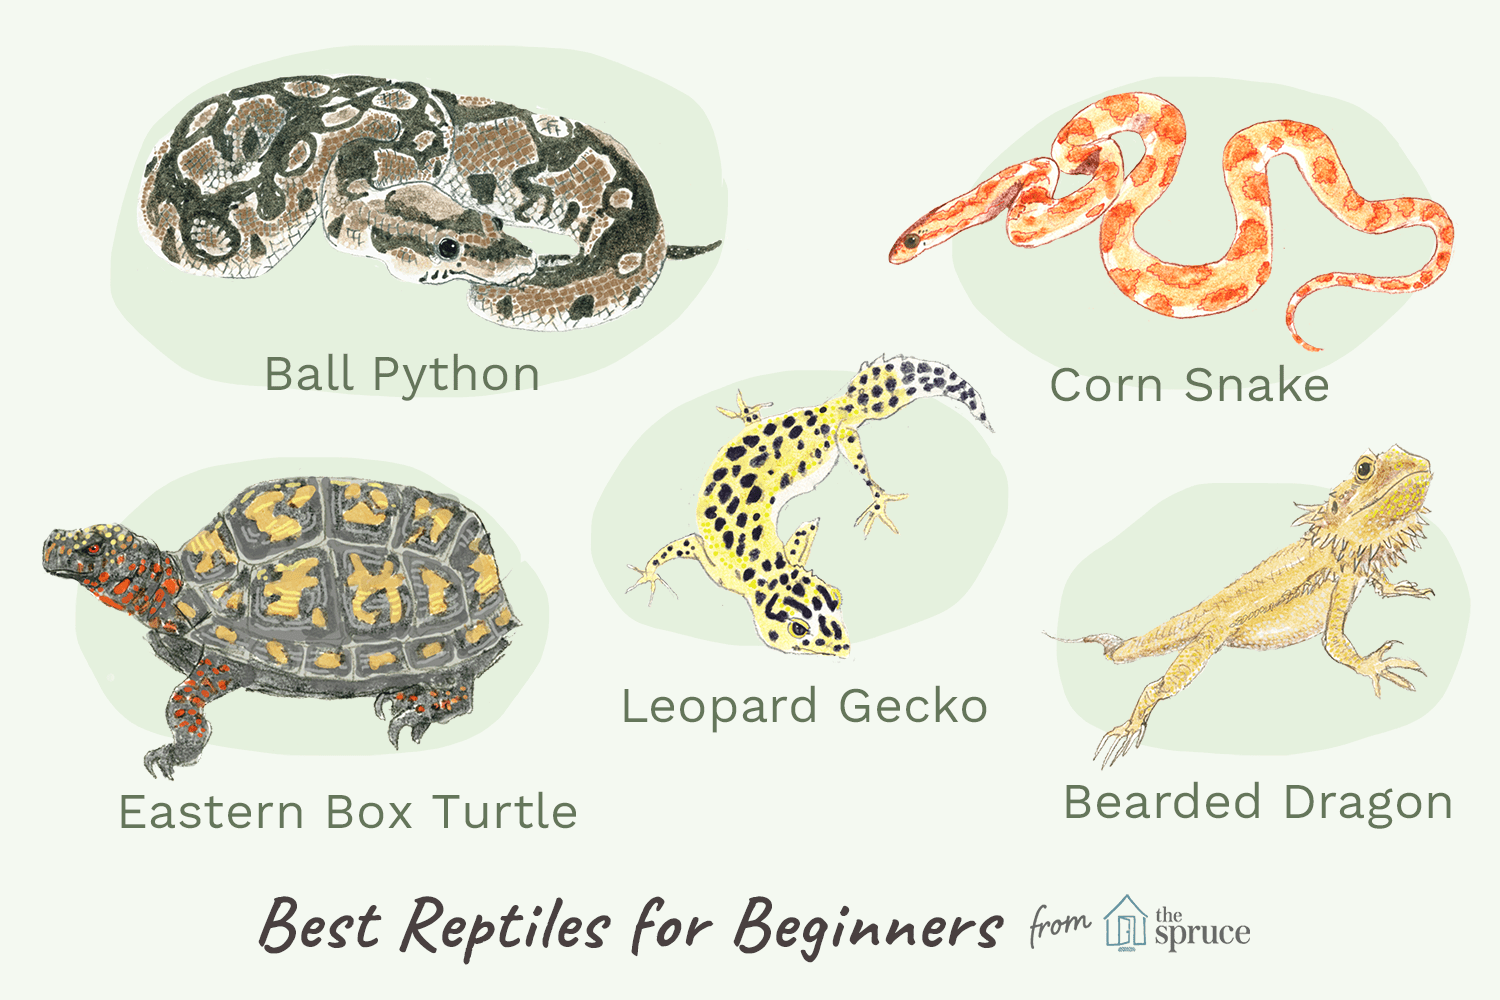 What is the friendliest reptile to have as a pet?